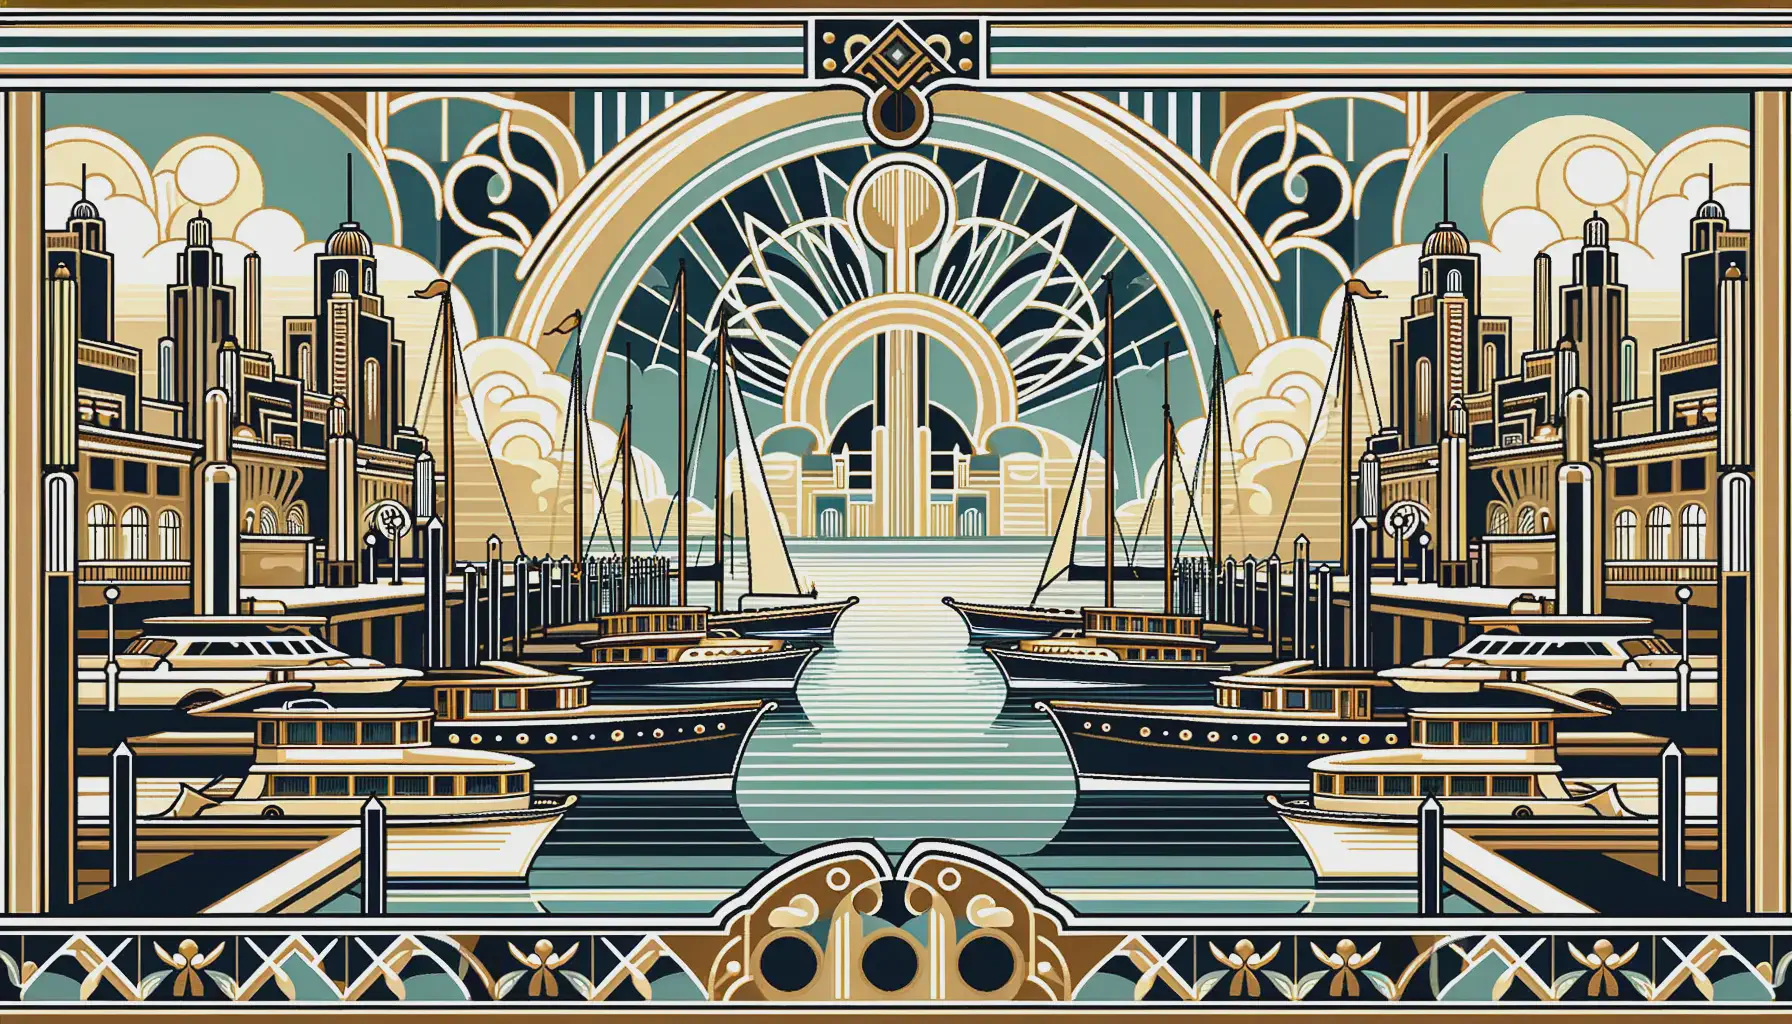 Moored boats in an art deco style.